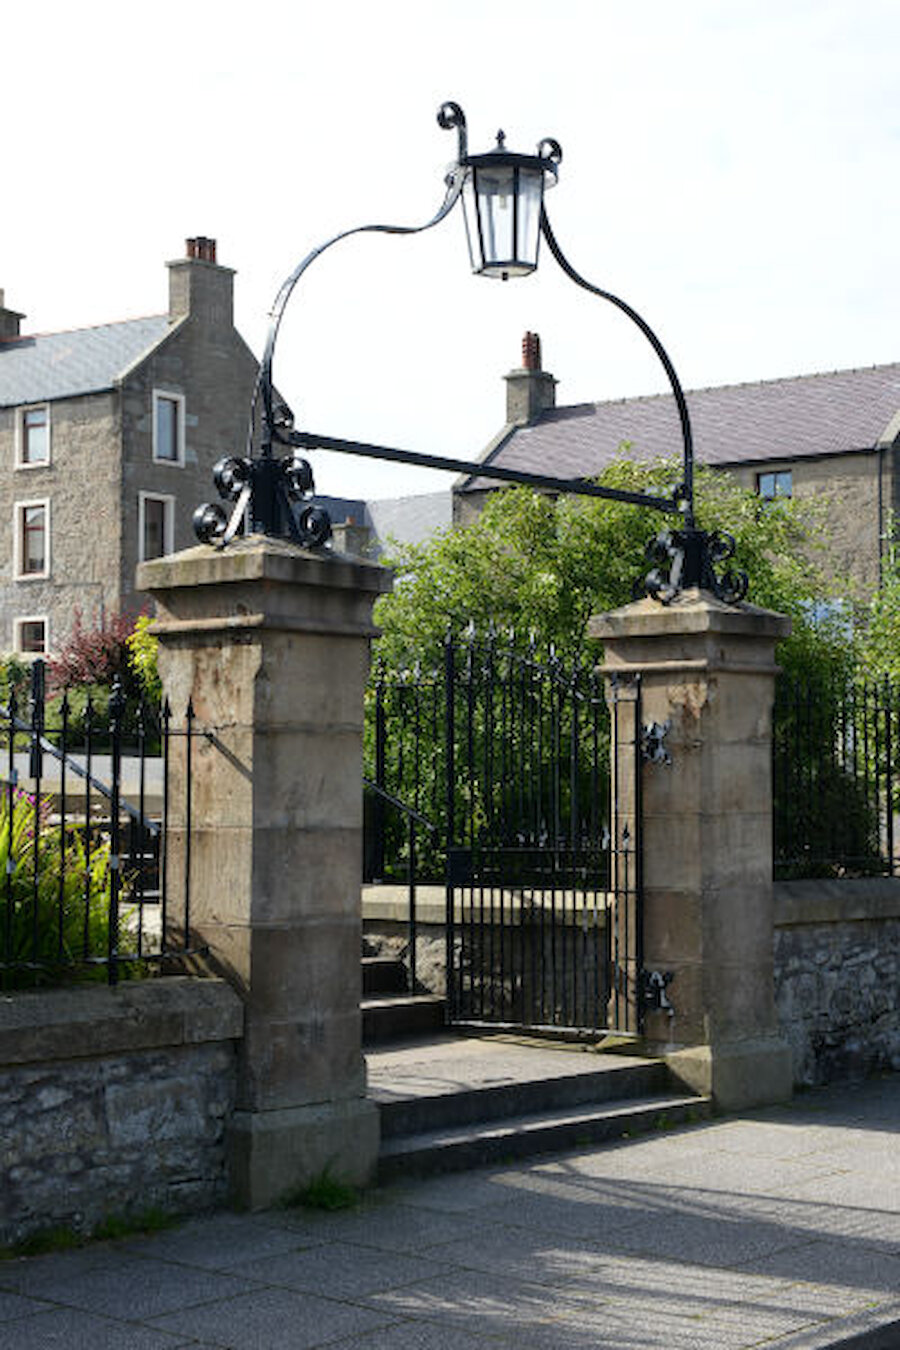 Lerwick's former Central School, now the Islesburgh Community Centre, has some rarer decorative ironwork.